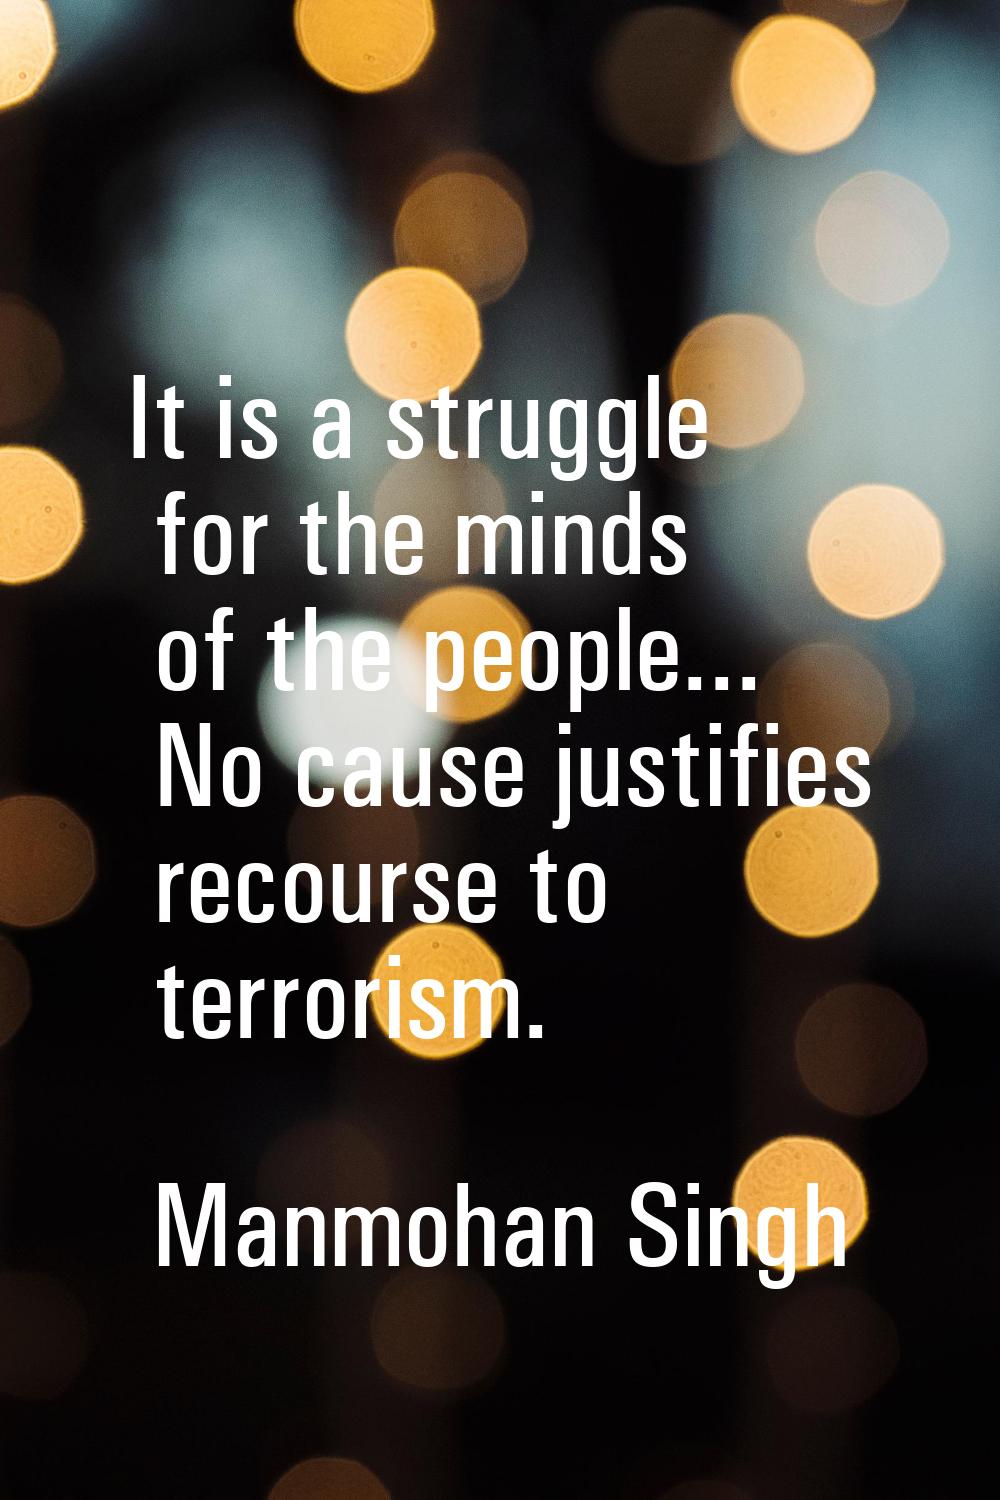 It is a struggle for the minds of the people... No cause justifies recourse to terrorism.